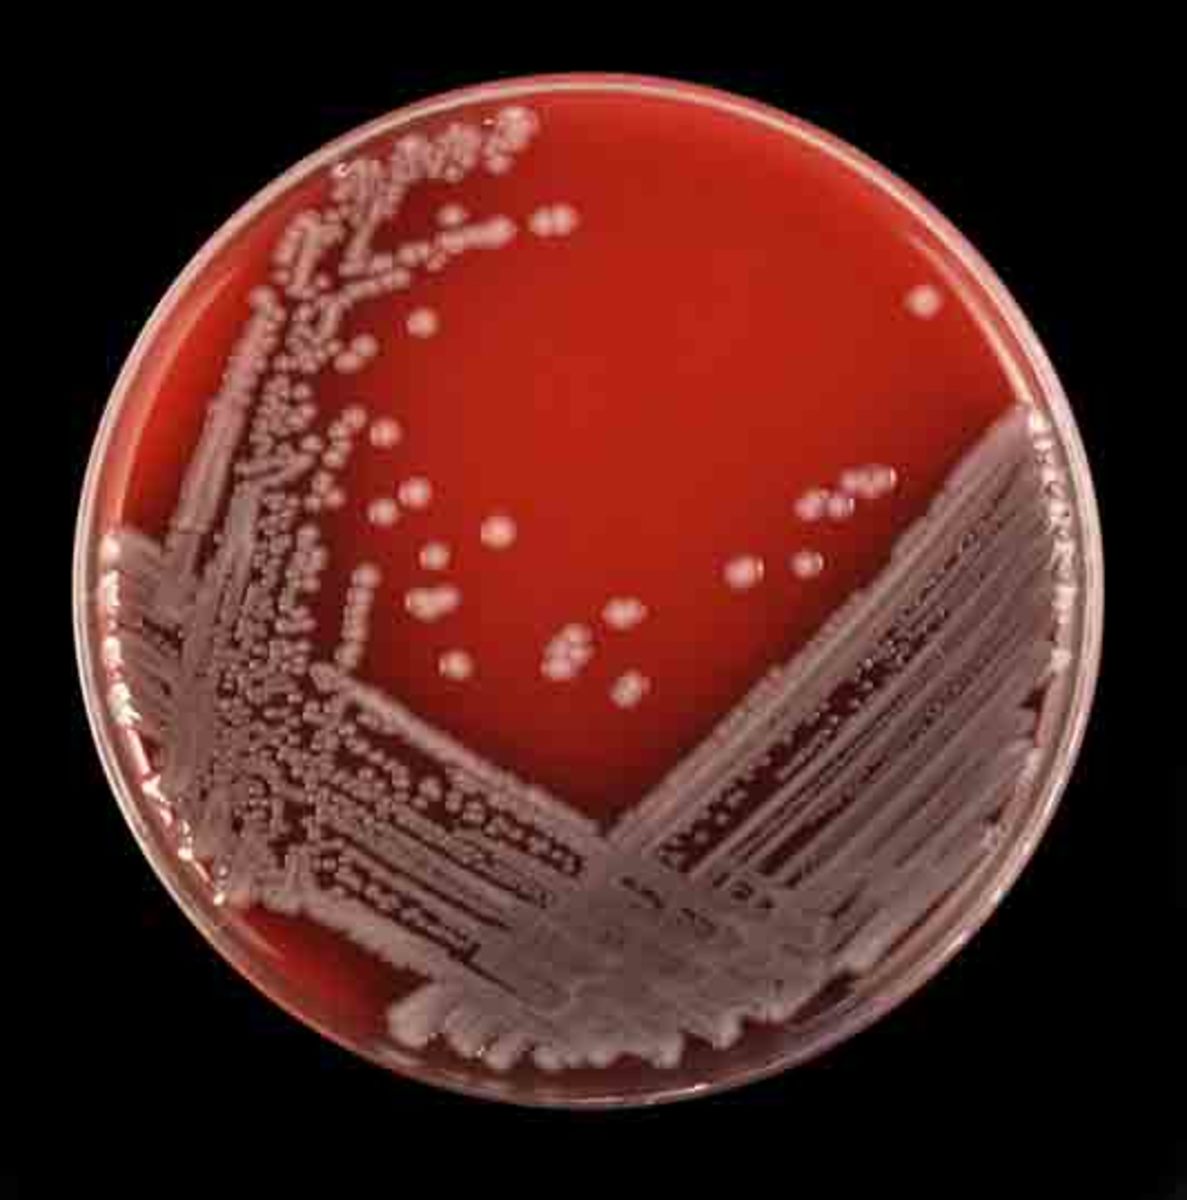 An example of what a microbiology plate looks like with bacteria growing on it. This one happens to be E.coli which is the most common cause of UTIs. 